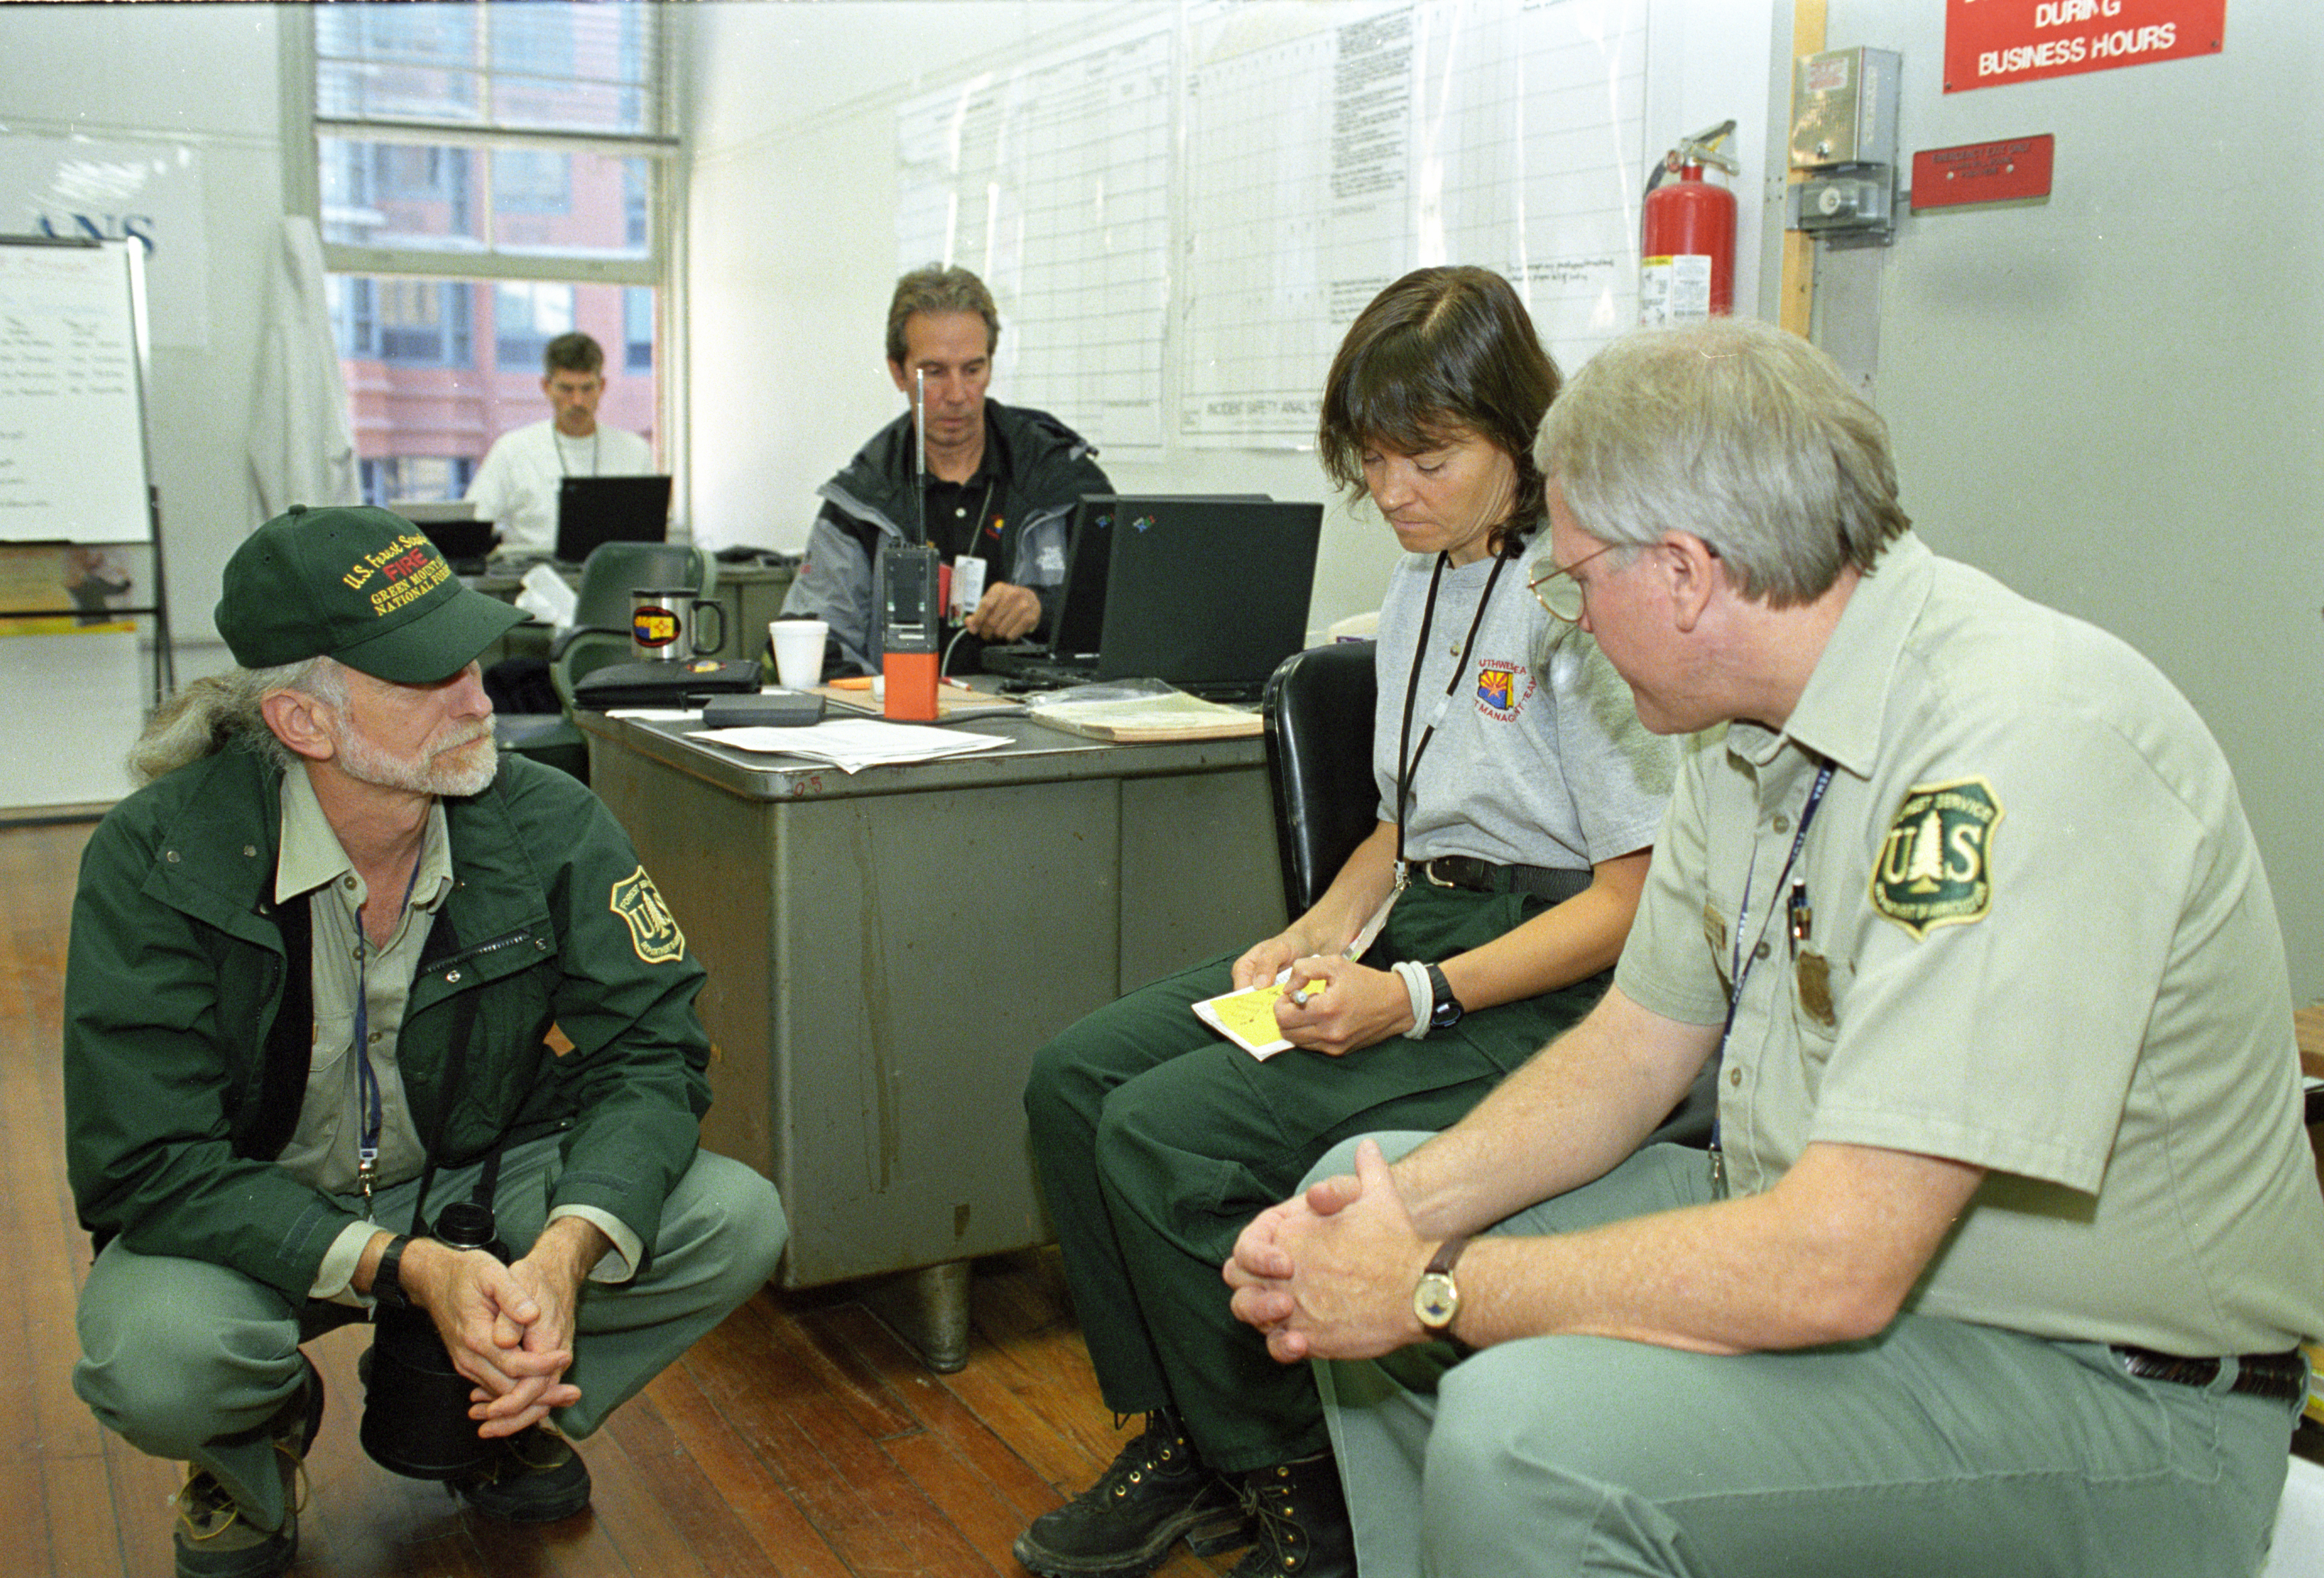 Forest Service and incident management employees in a room discussing things.